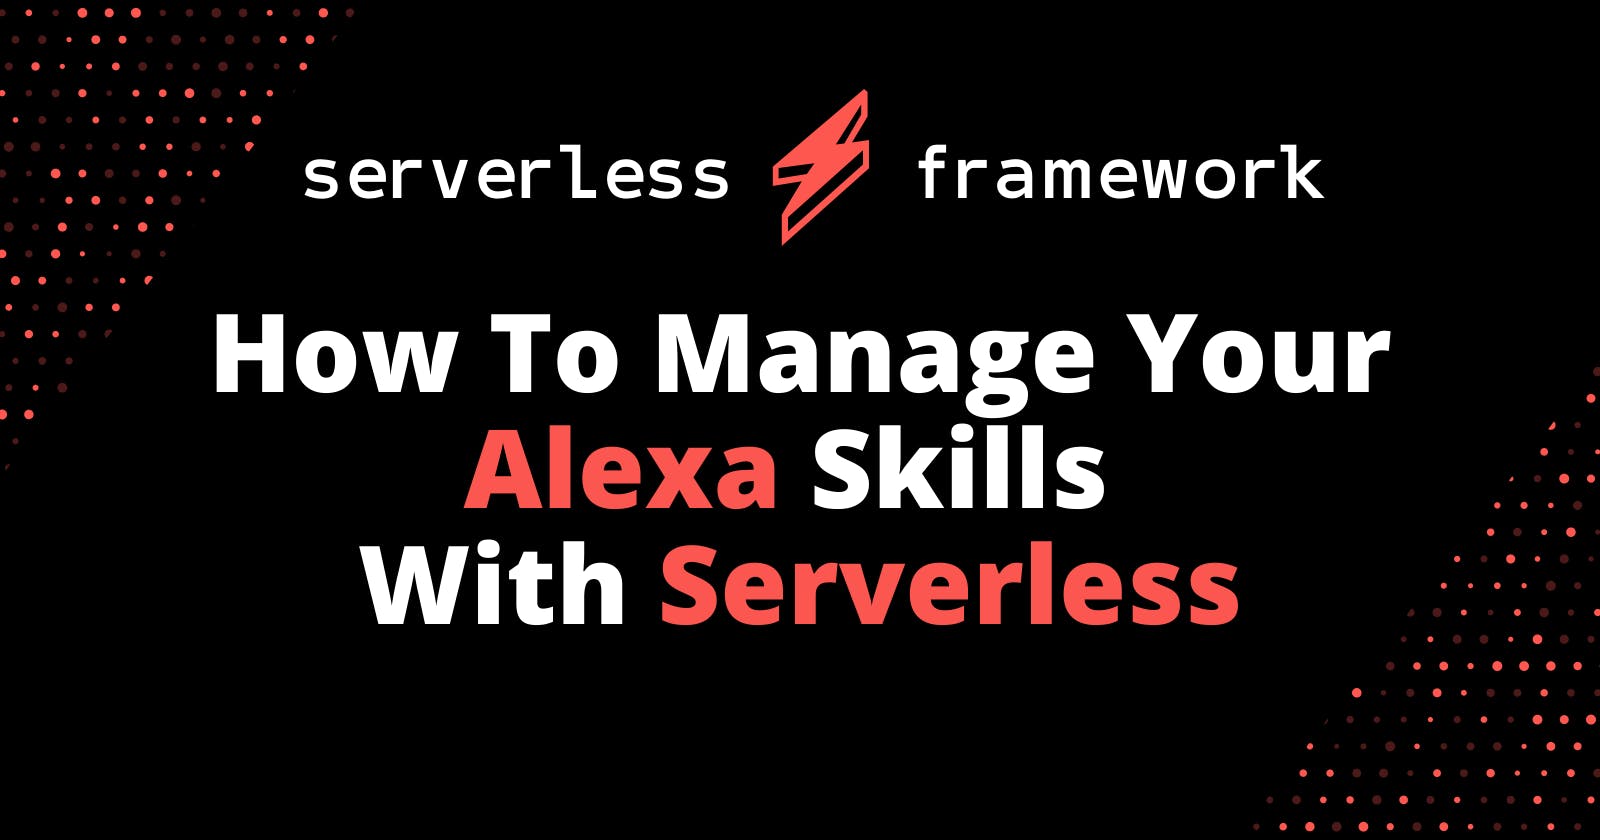 How To Manage Your Alexa Skills With Serverless